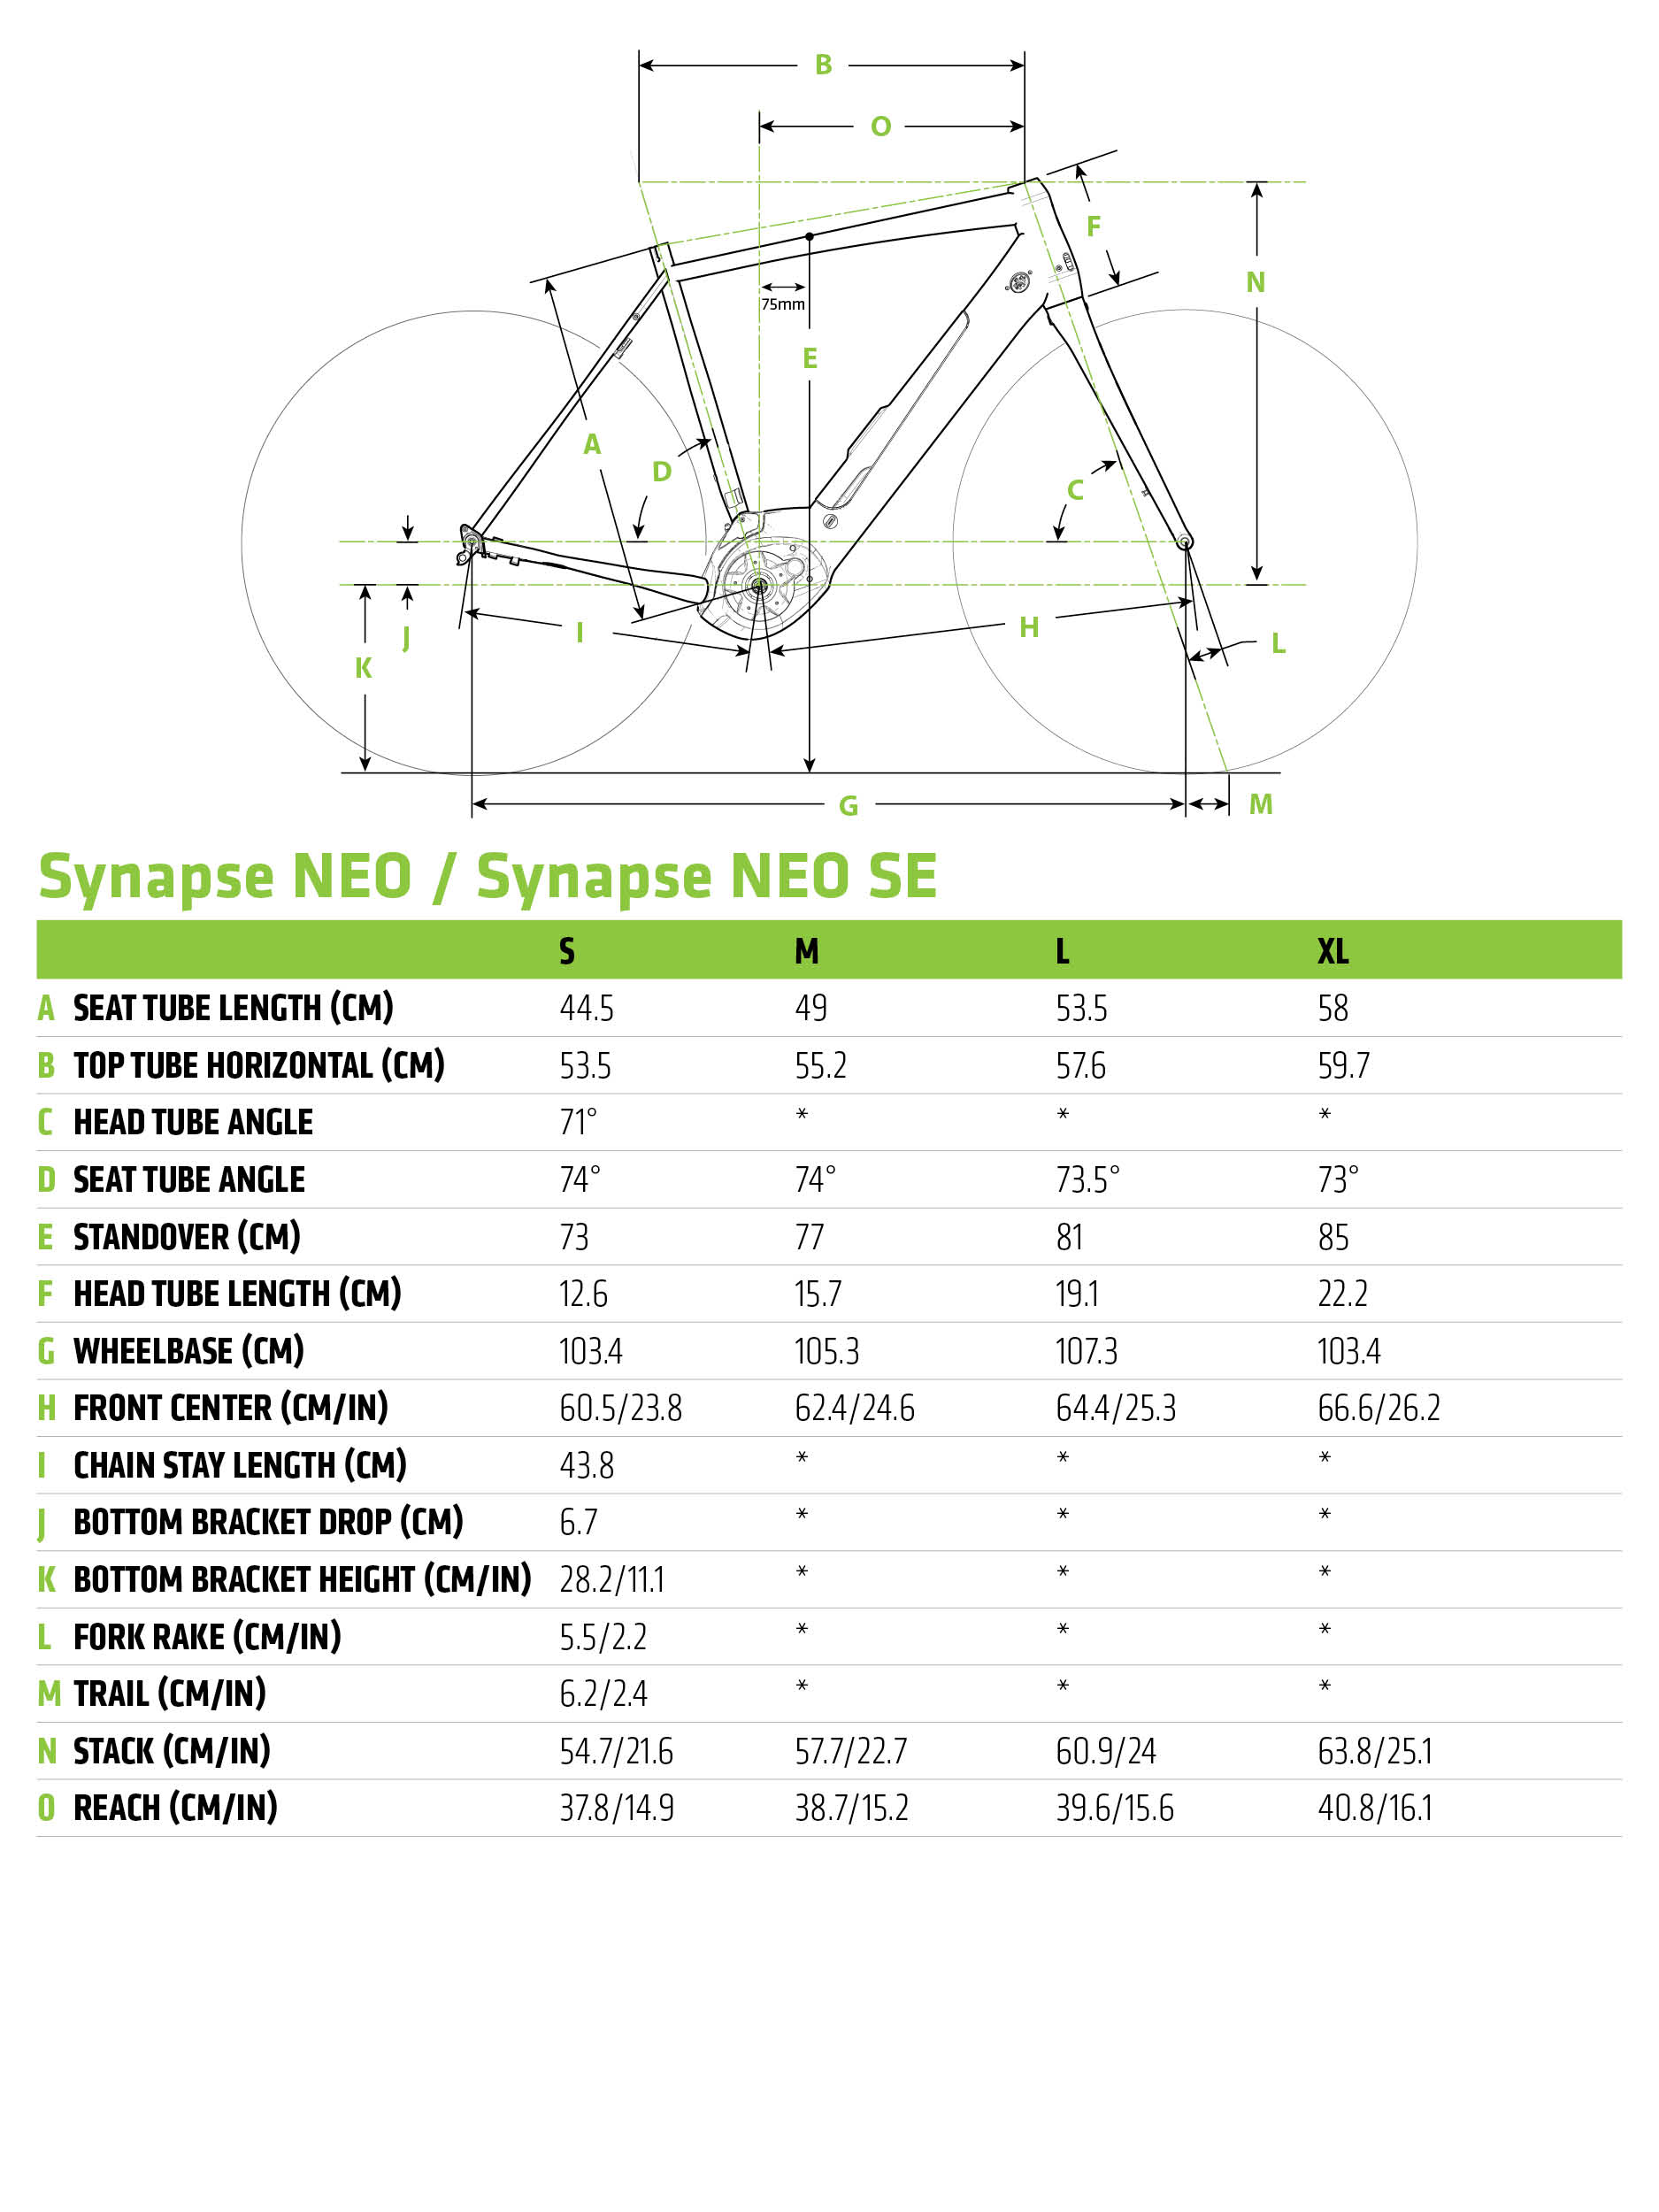 Cannondale Synapse Neo SE geometry chart